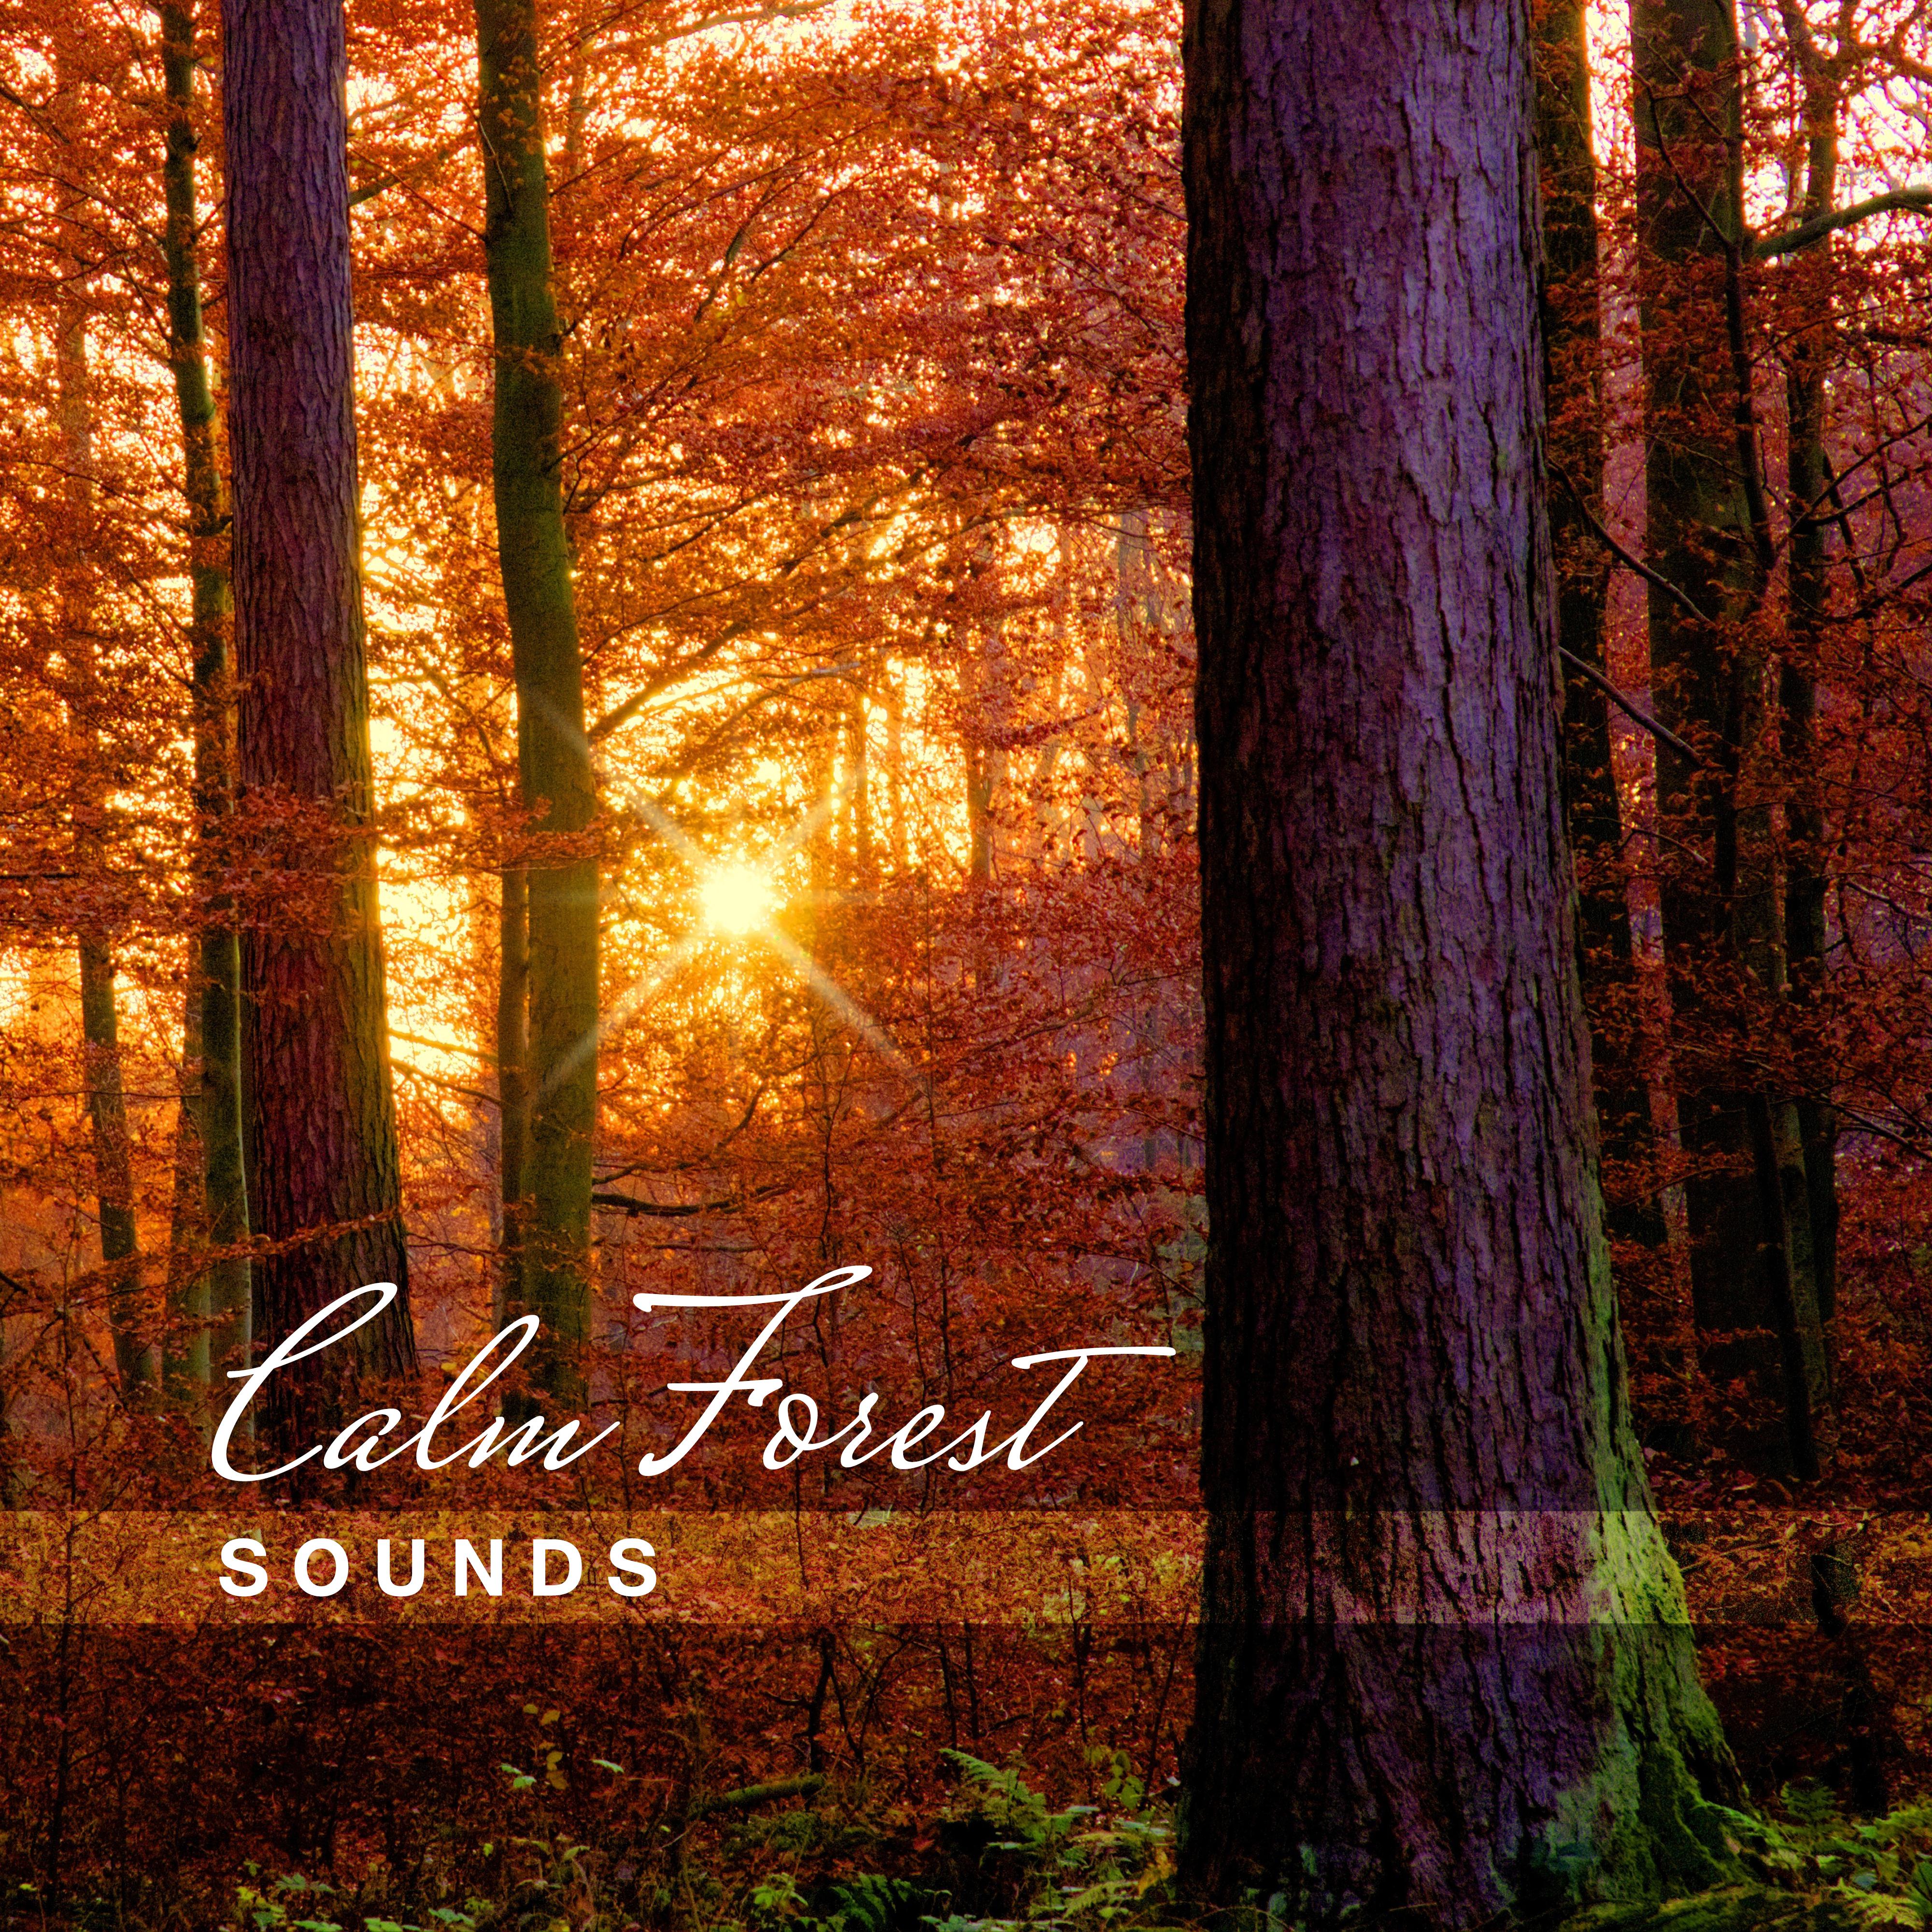 Calm Forest Sounds – Soothing & Relaxing New Age Music, Nature Sounds to Rest, Ambient Waves